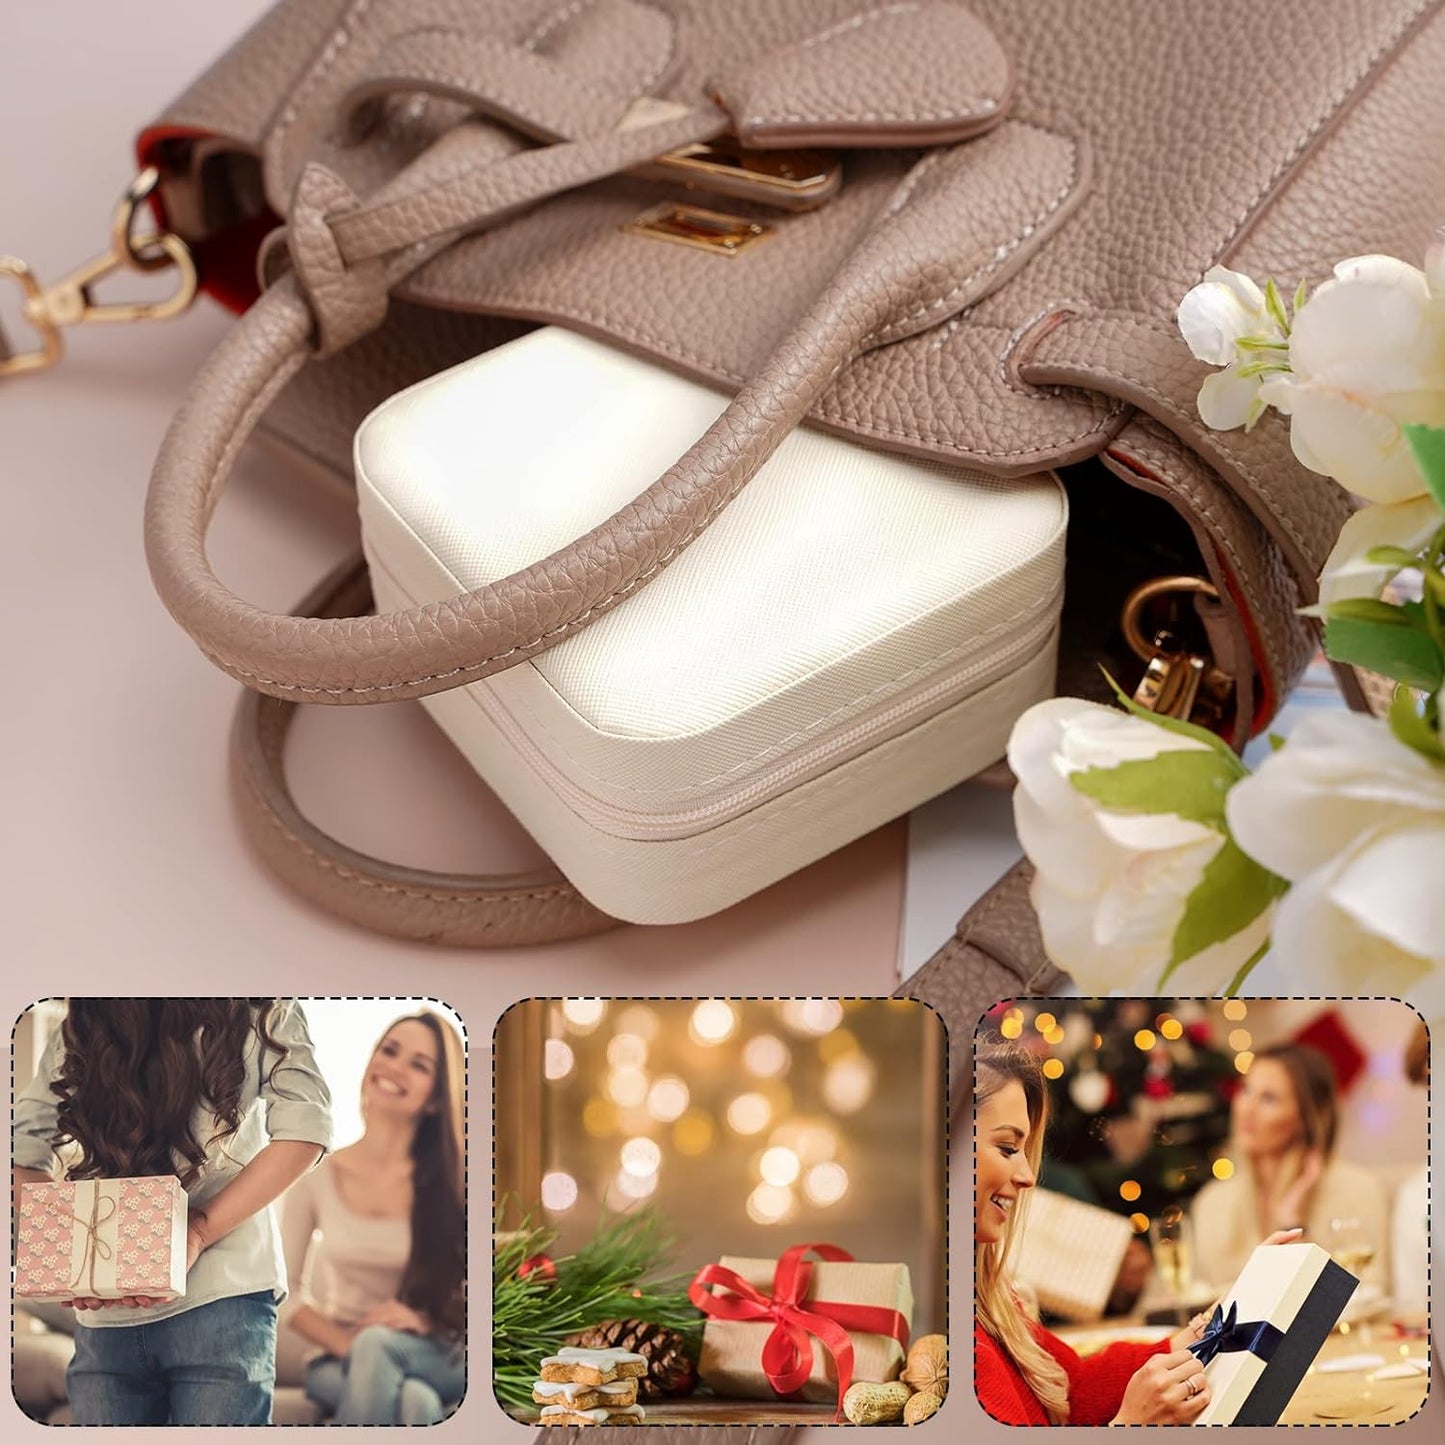 Portable Travel Mini Jewelry Box: Leather Jewellery Ring Organizer Case in Elegant White - A Stylish Storage Gift Box for Girls and Women